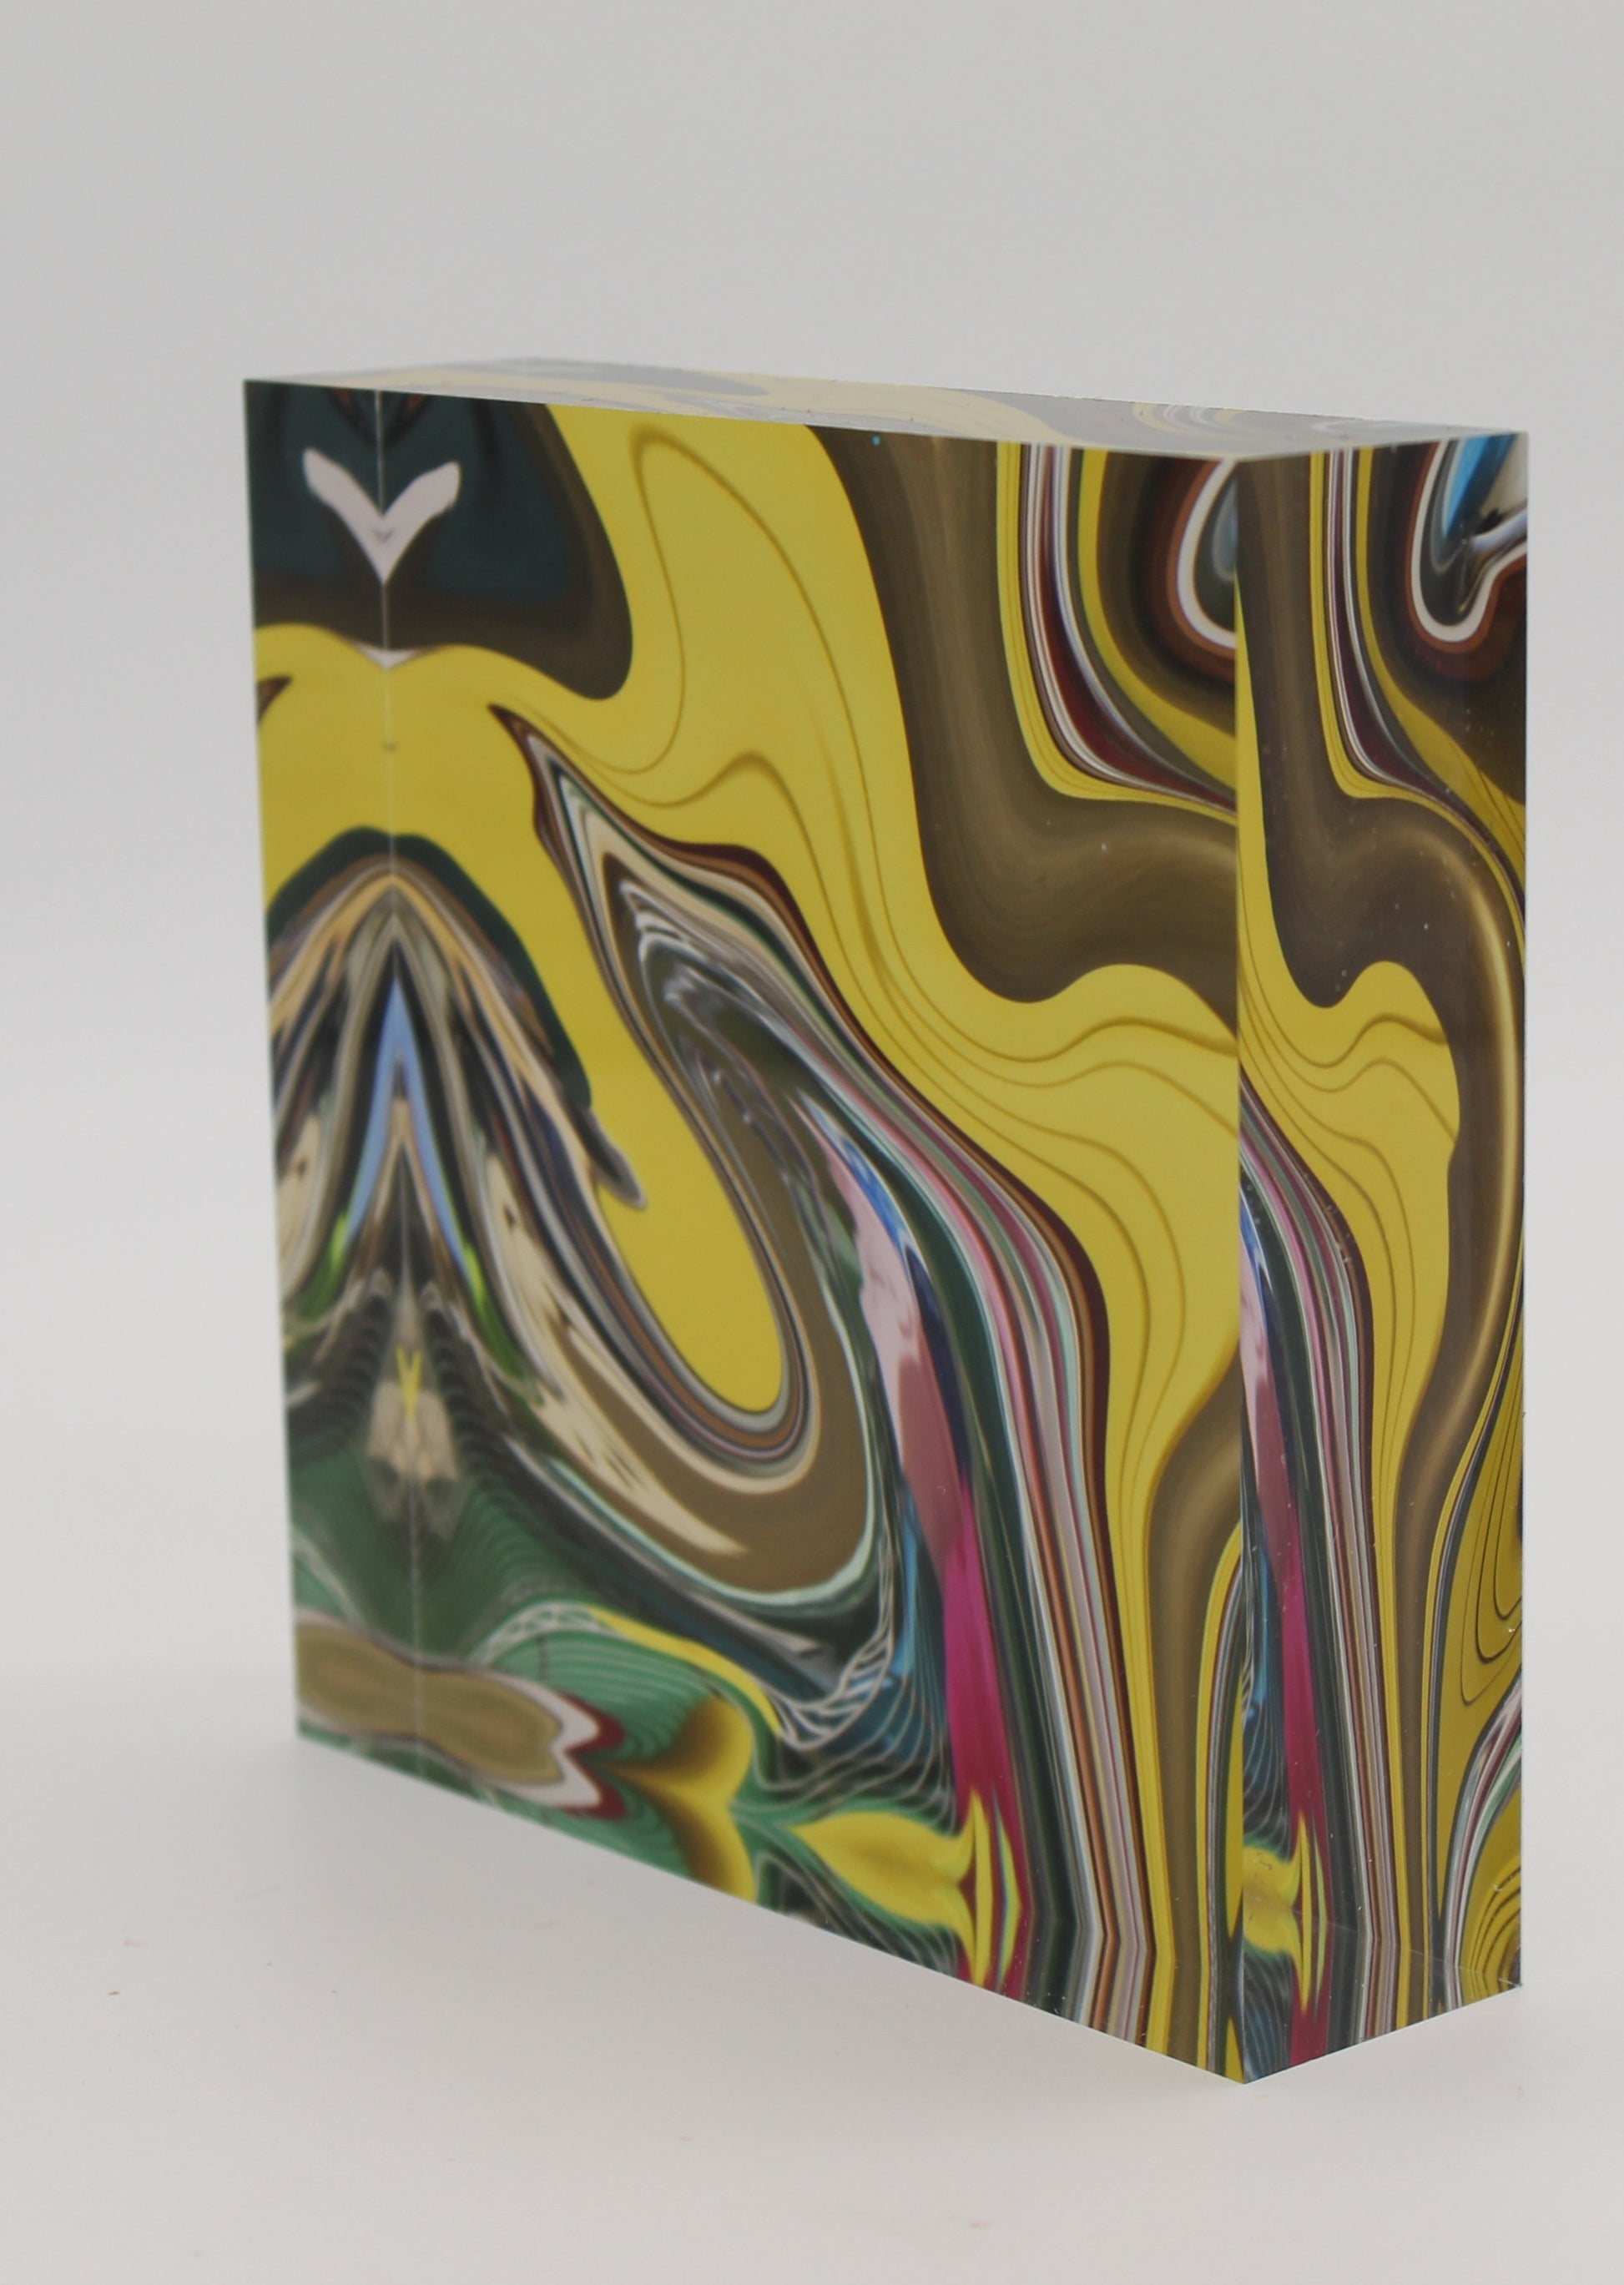 Tilted view of Acrylic block with swirling design of yellow, gold, green, pink swirl